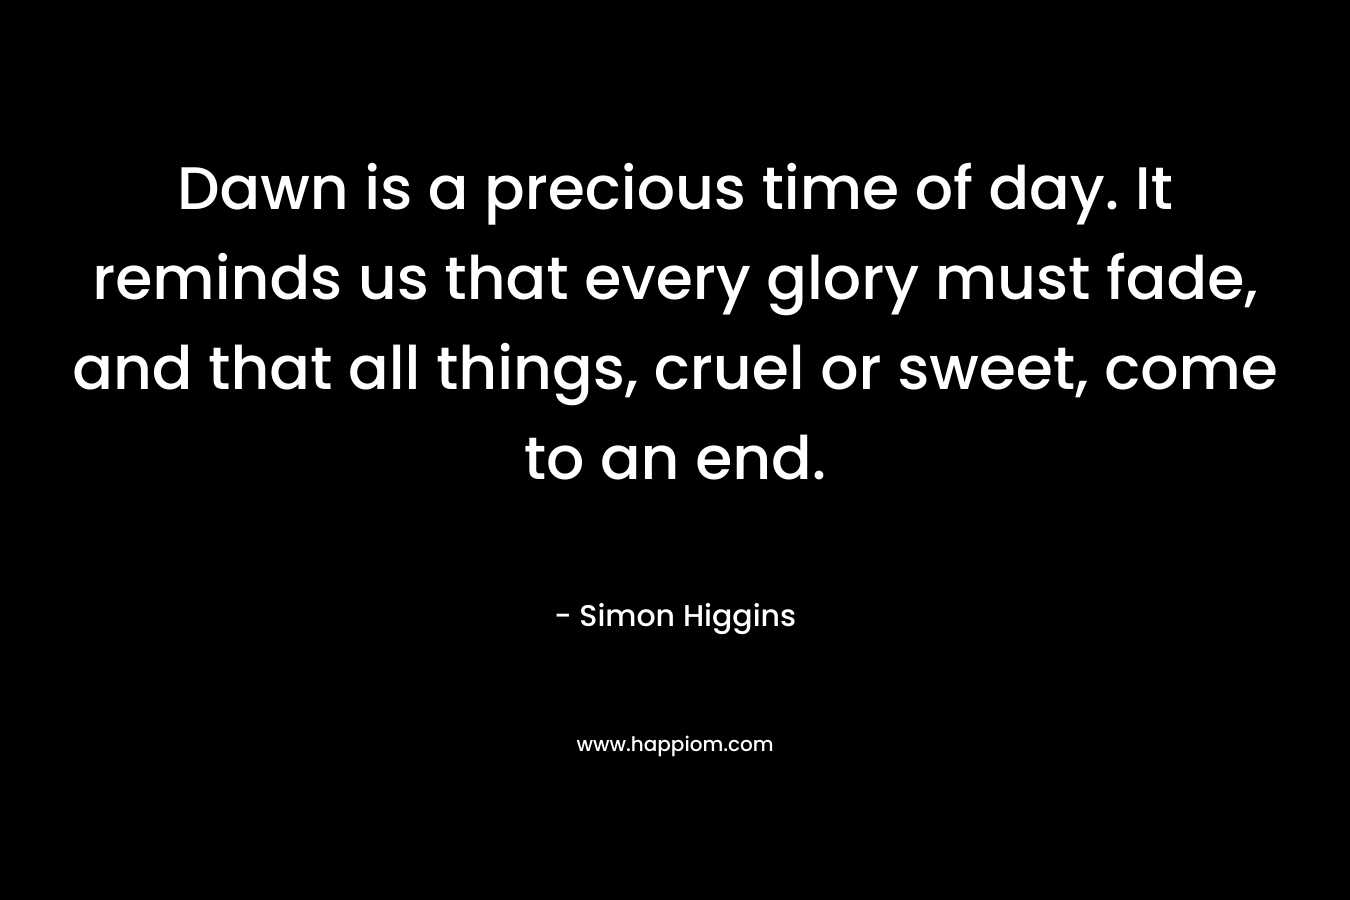 Dawn is a precious time of day. It reminds us that every glory must fade, and that all things, cruel or sweet, come to an end. – Simon Higgins